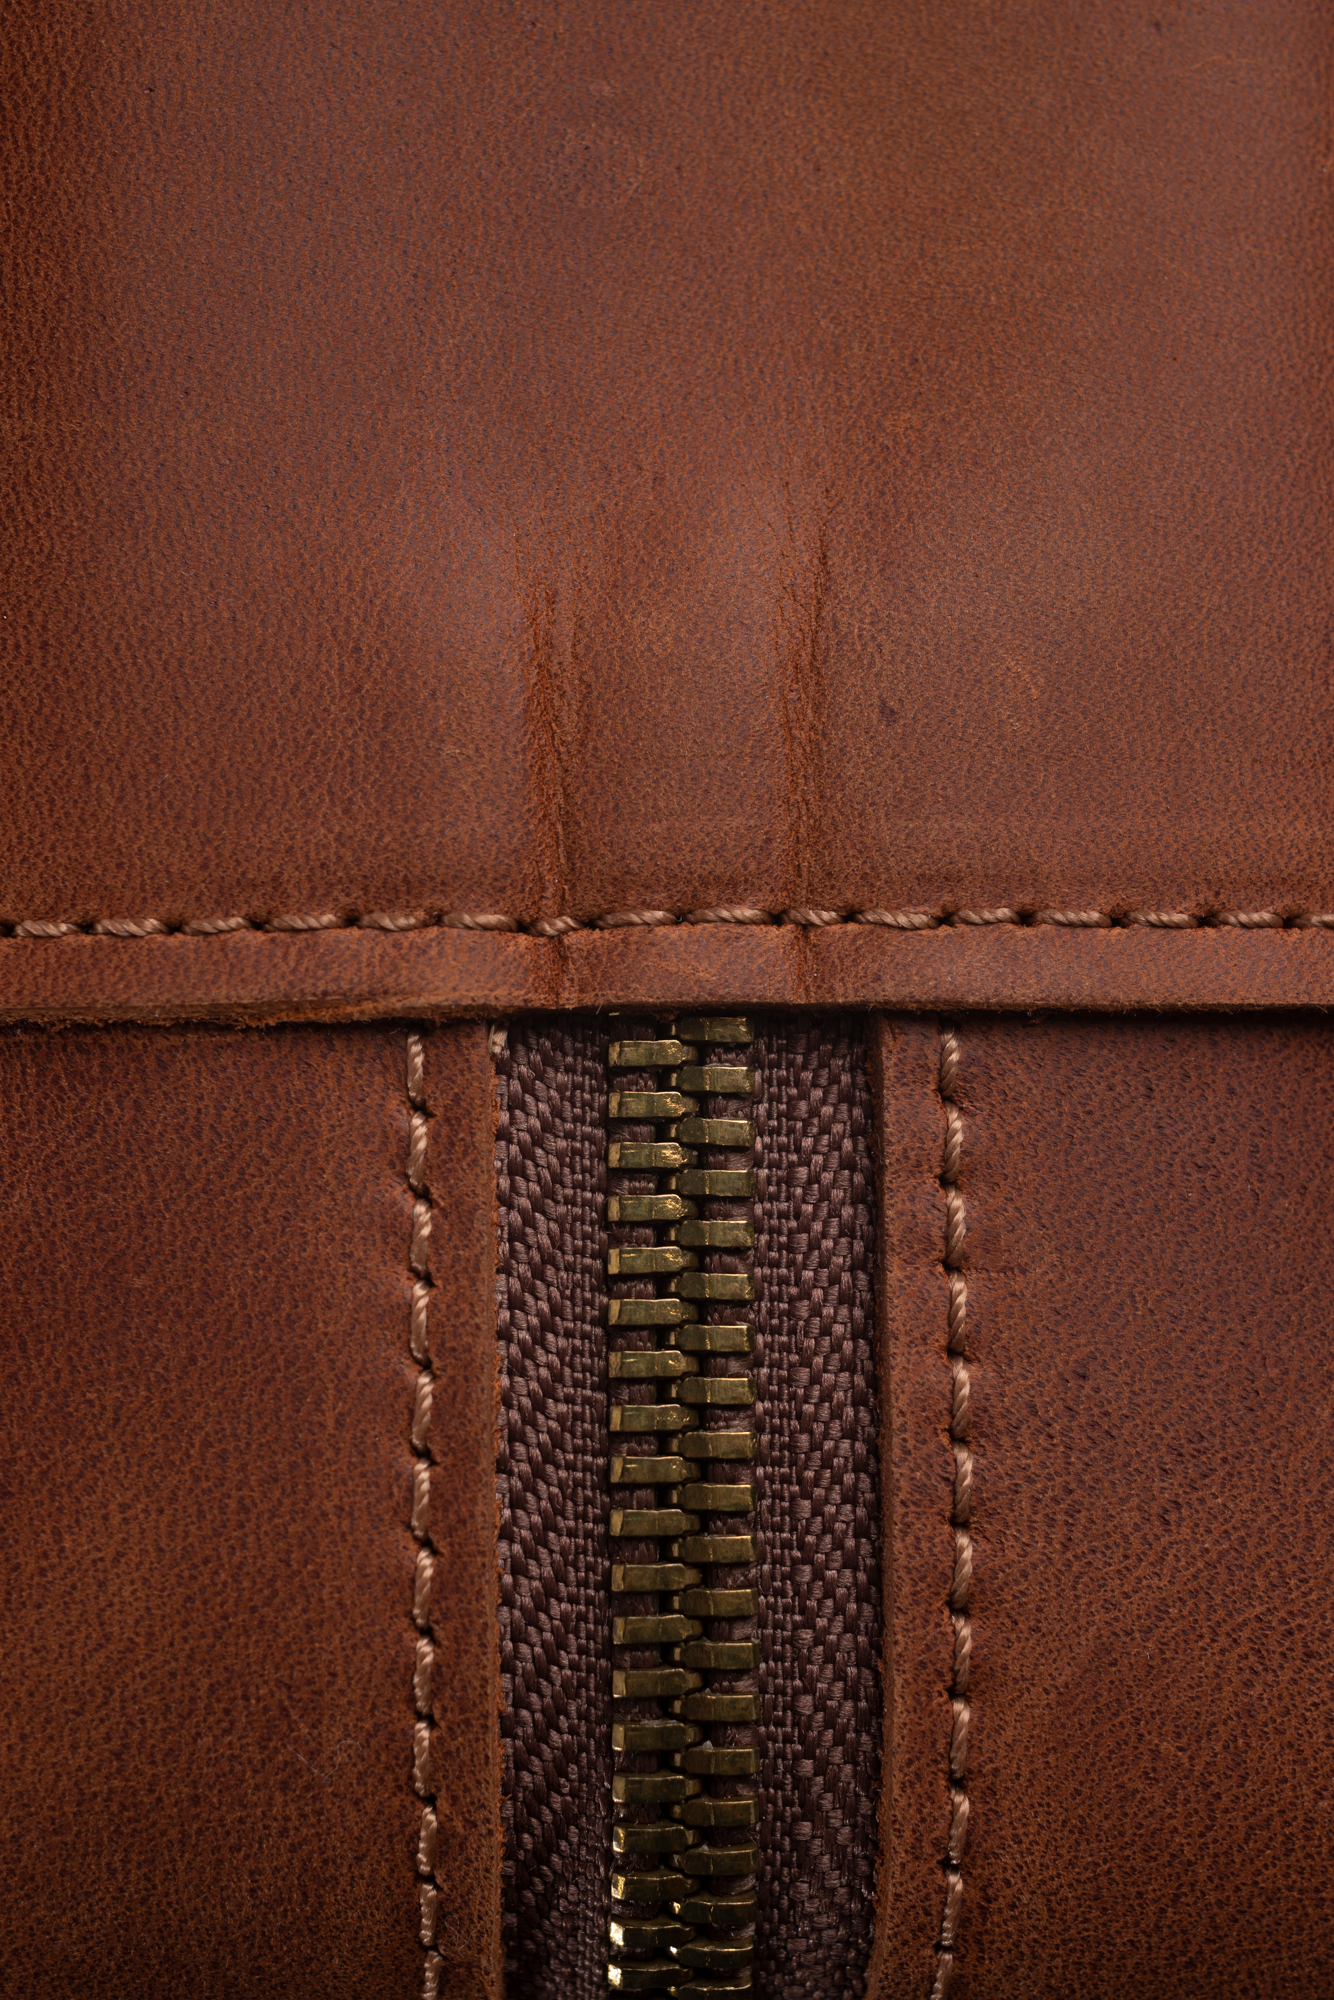 Signature Leather Case in Light Brown